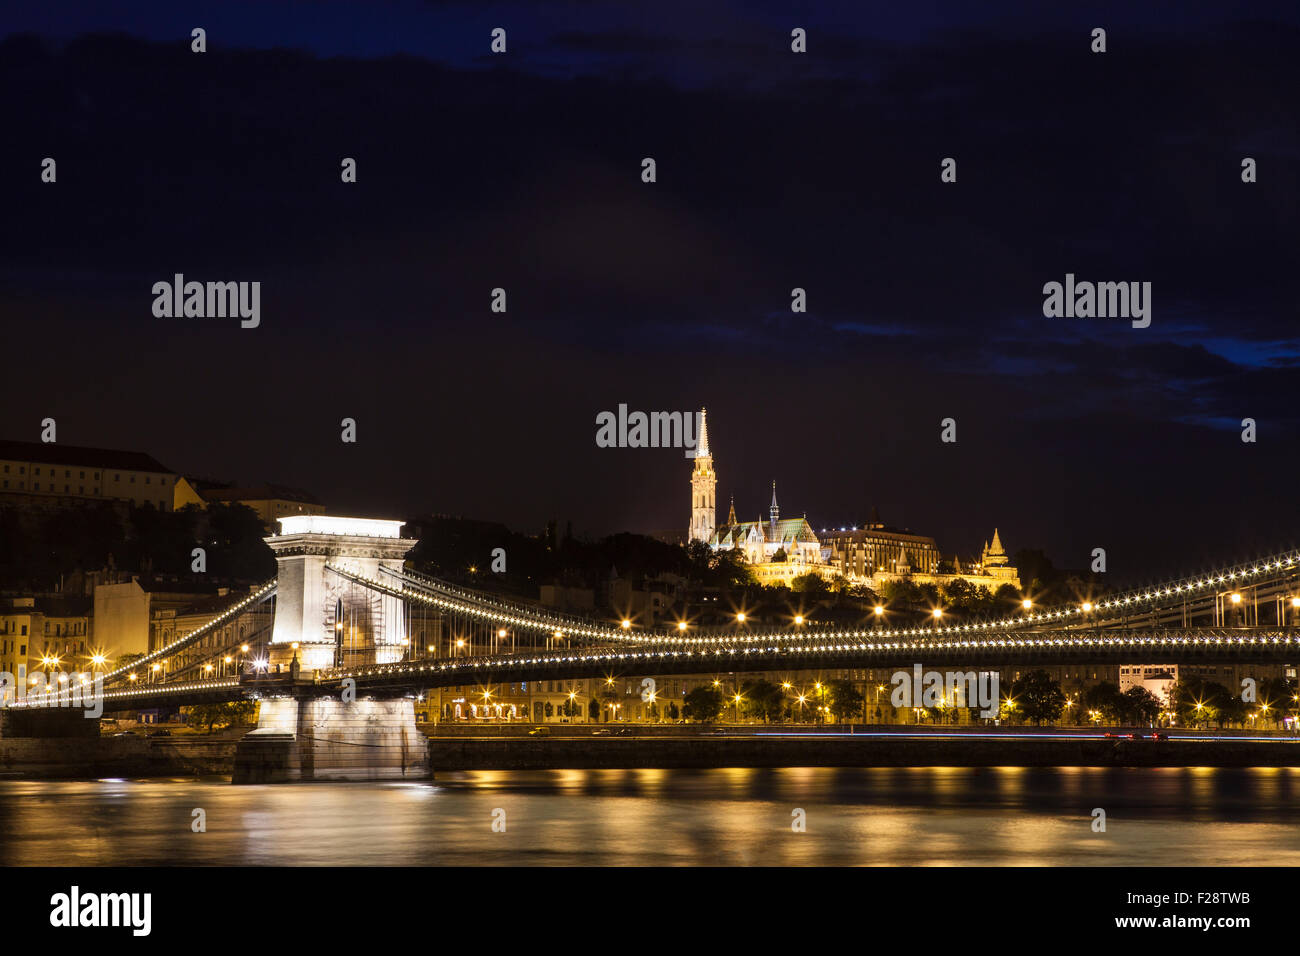 A beautiful night-time view of the Chain Bridge spanning the River Danube with the Fisherman’s Bastion and St. Matthias Church i Stock Photo